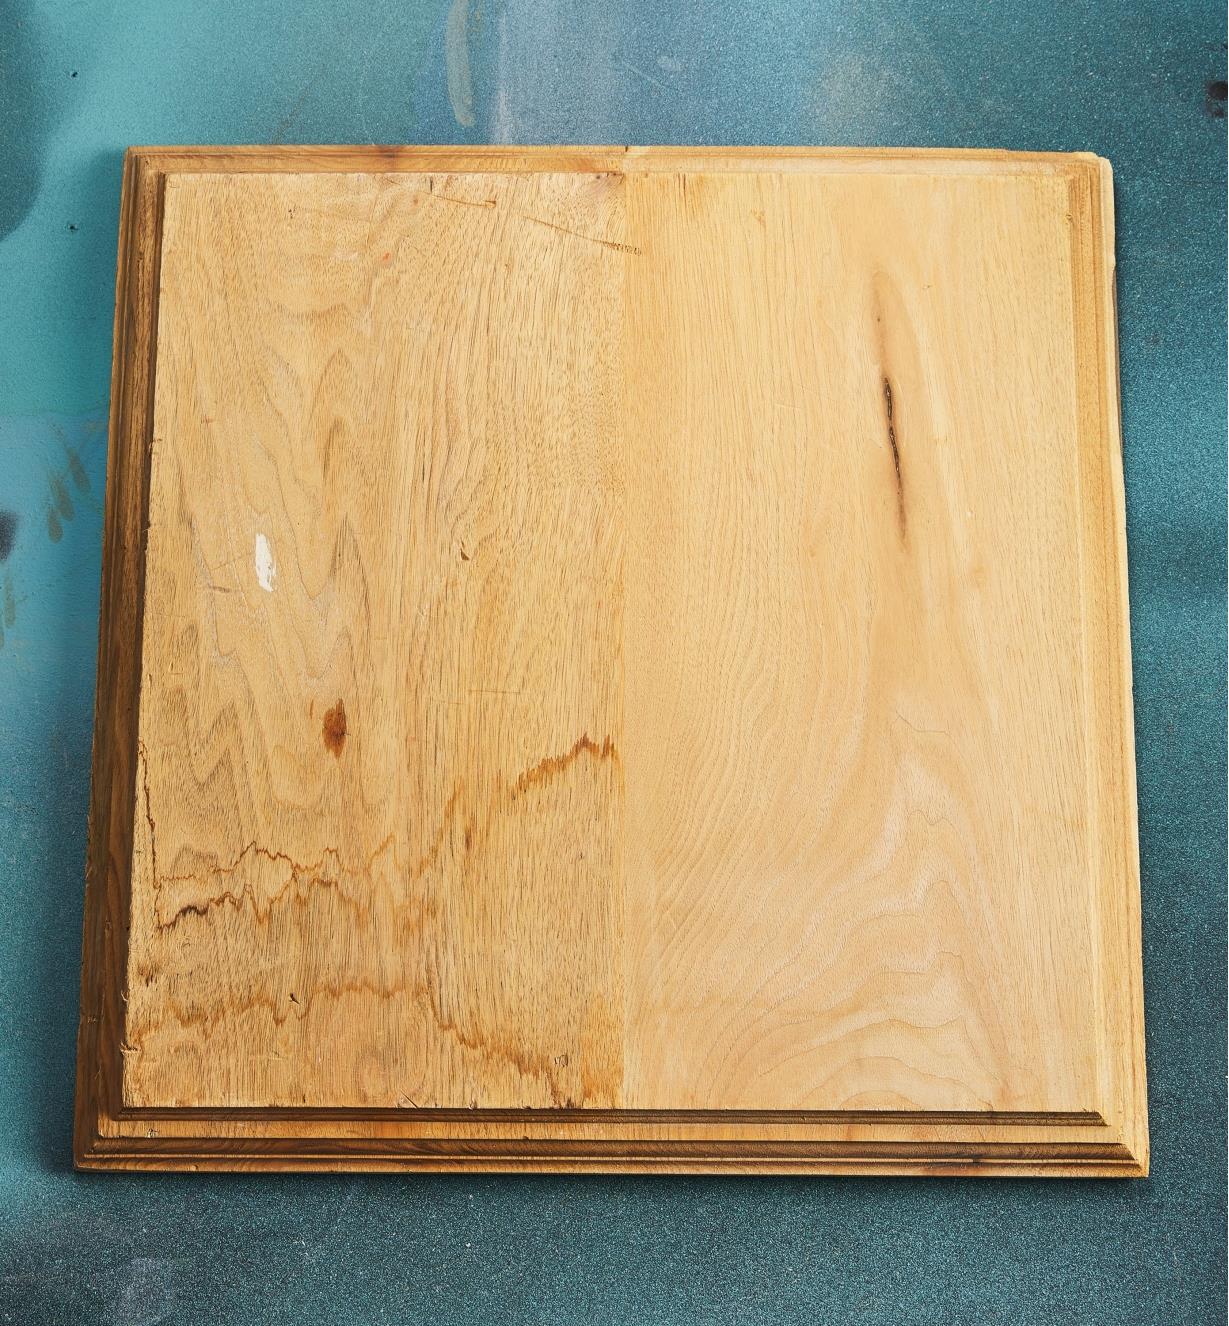 A wooden board with one half dark and stained and the other half light and clean